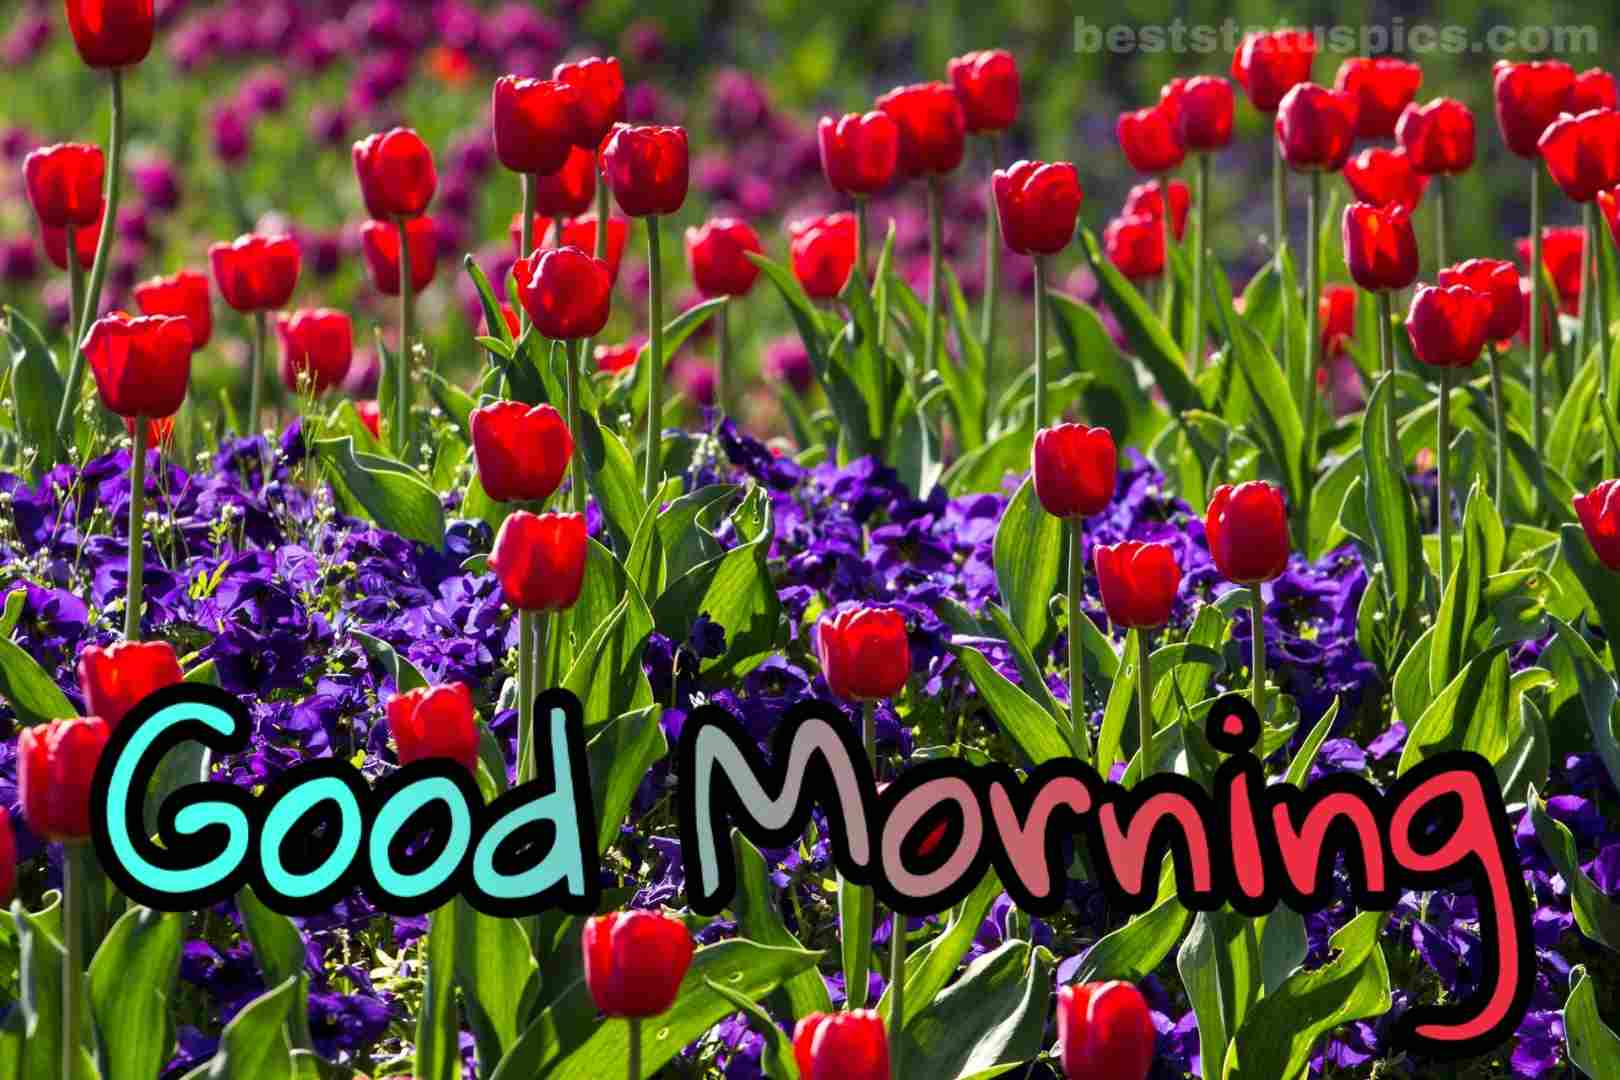 Good Morning Images With Beautiful Flowers Best Status Pics